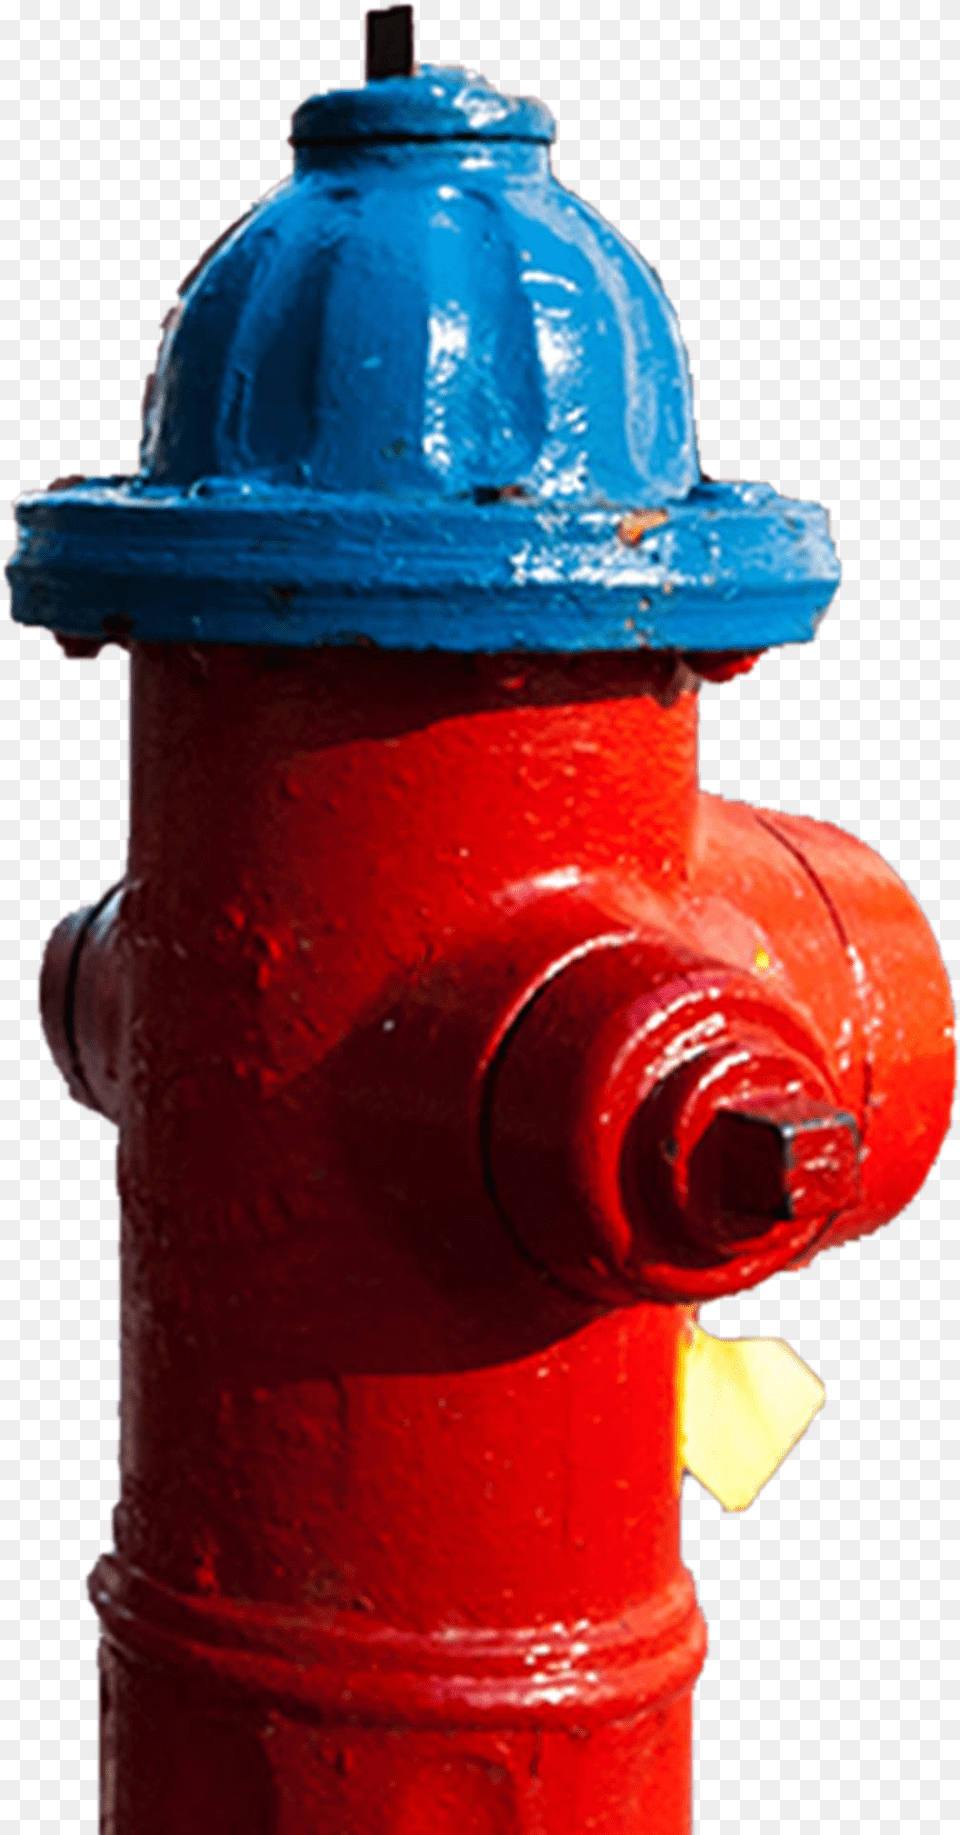 Red Fire Hydrant Background Image Play Hidrante De Bomberos, Fire Hydrant Free Transparent Png